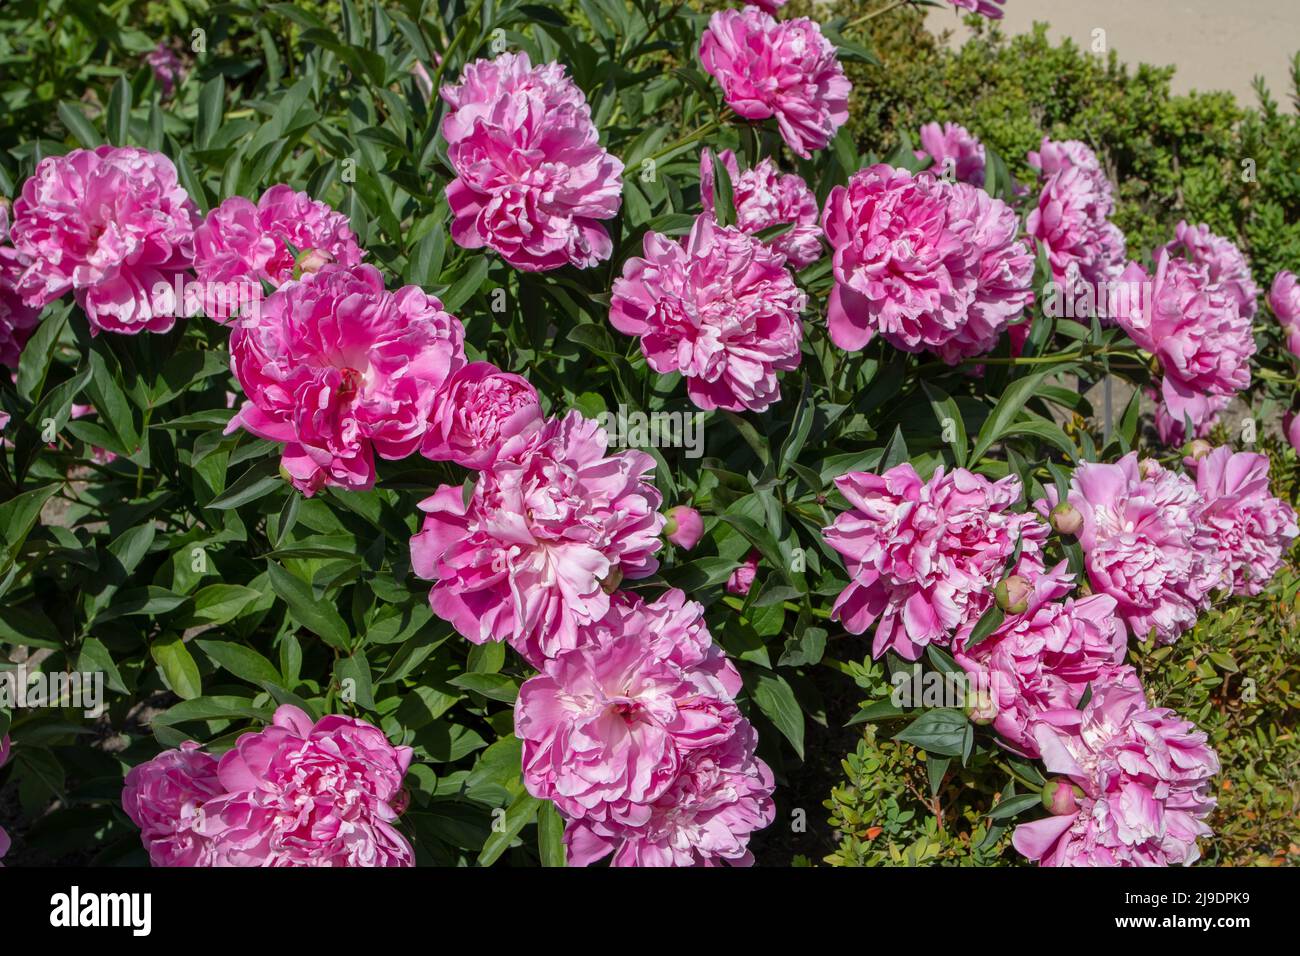 Herbaceous peony pink double flowers and green lush foliage Stock Photo